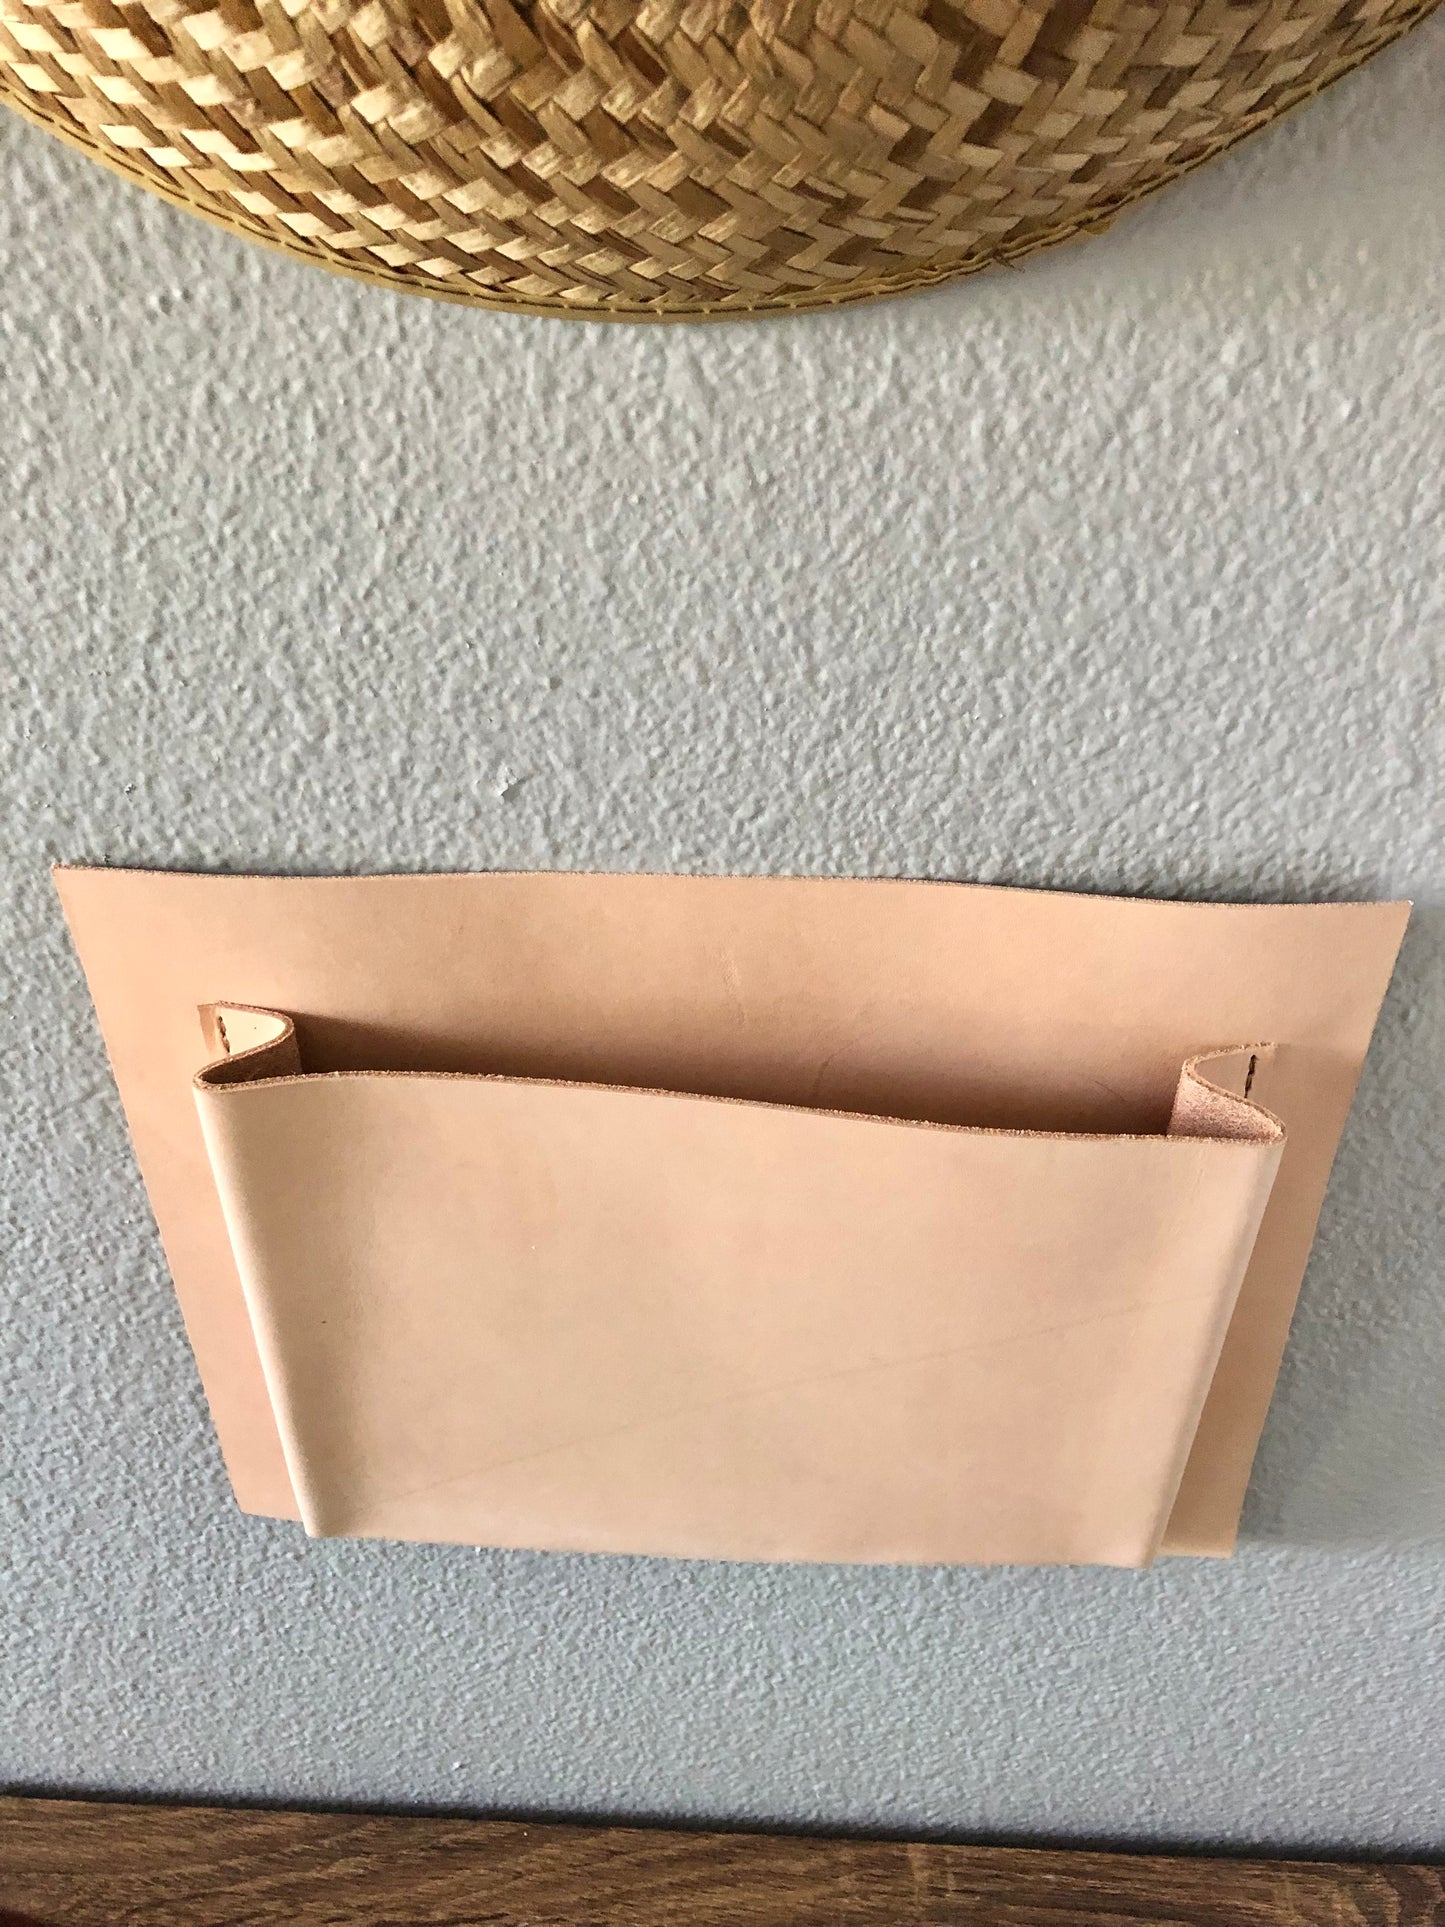 Handcrafted Nude Leather Wall Pocket | Hanging Storage | Leather Magazine Holder | Mail Organizer